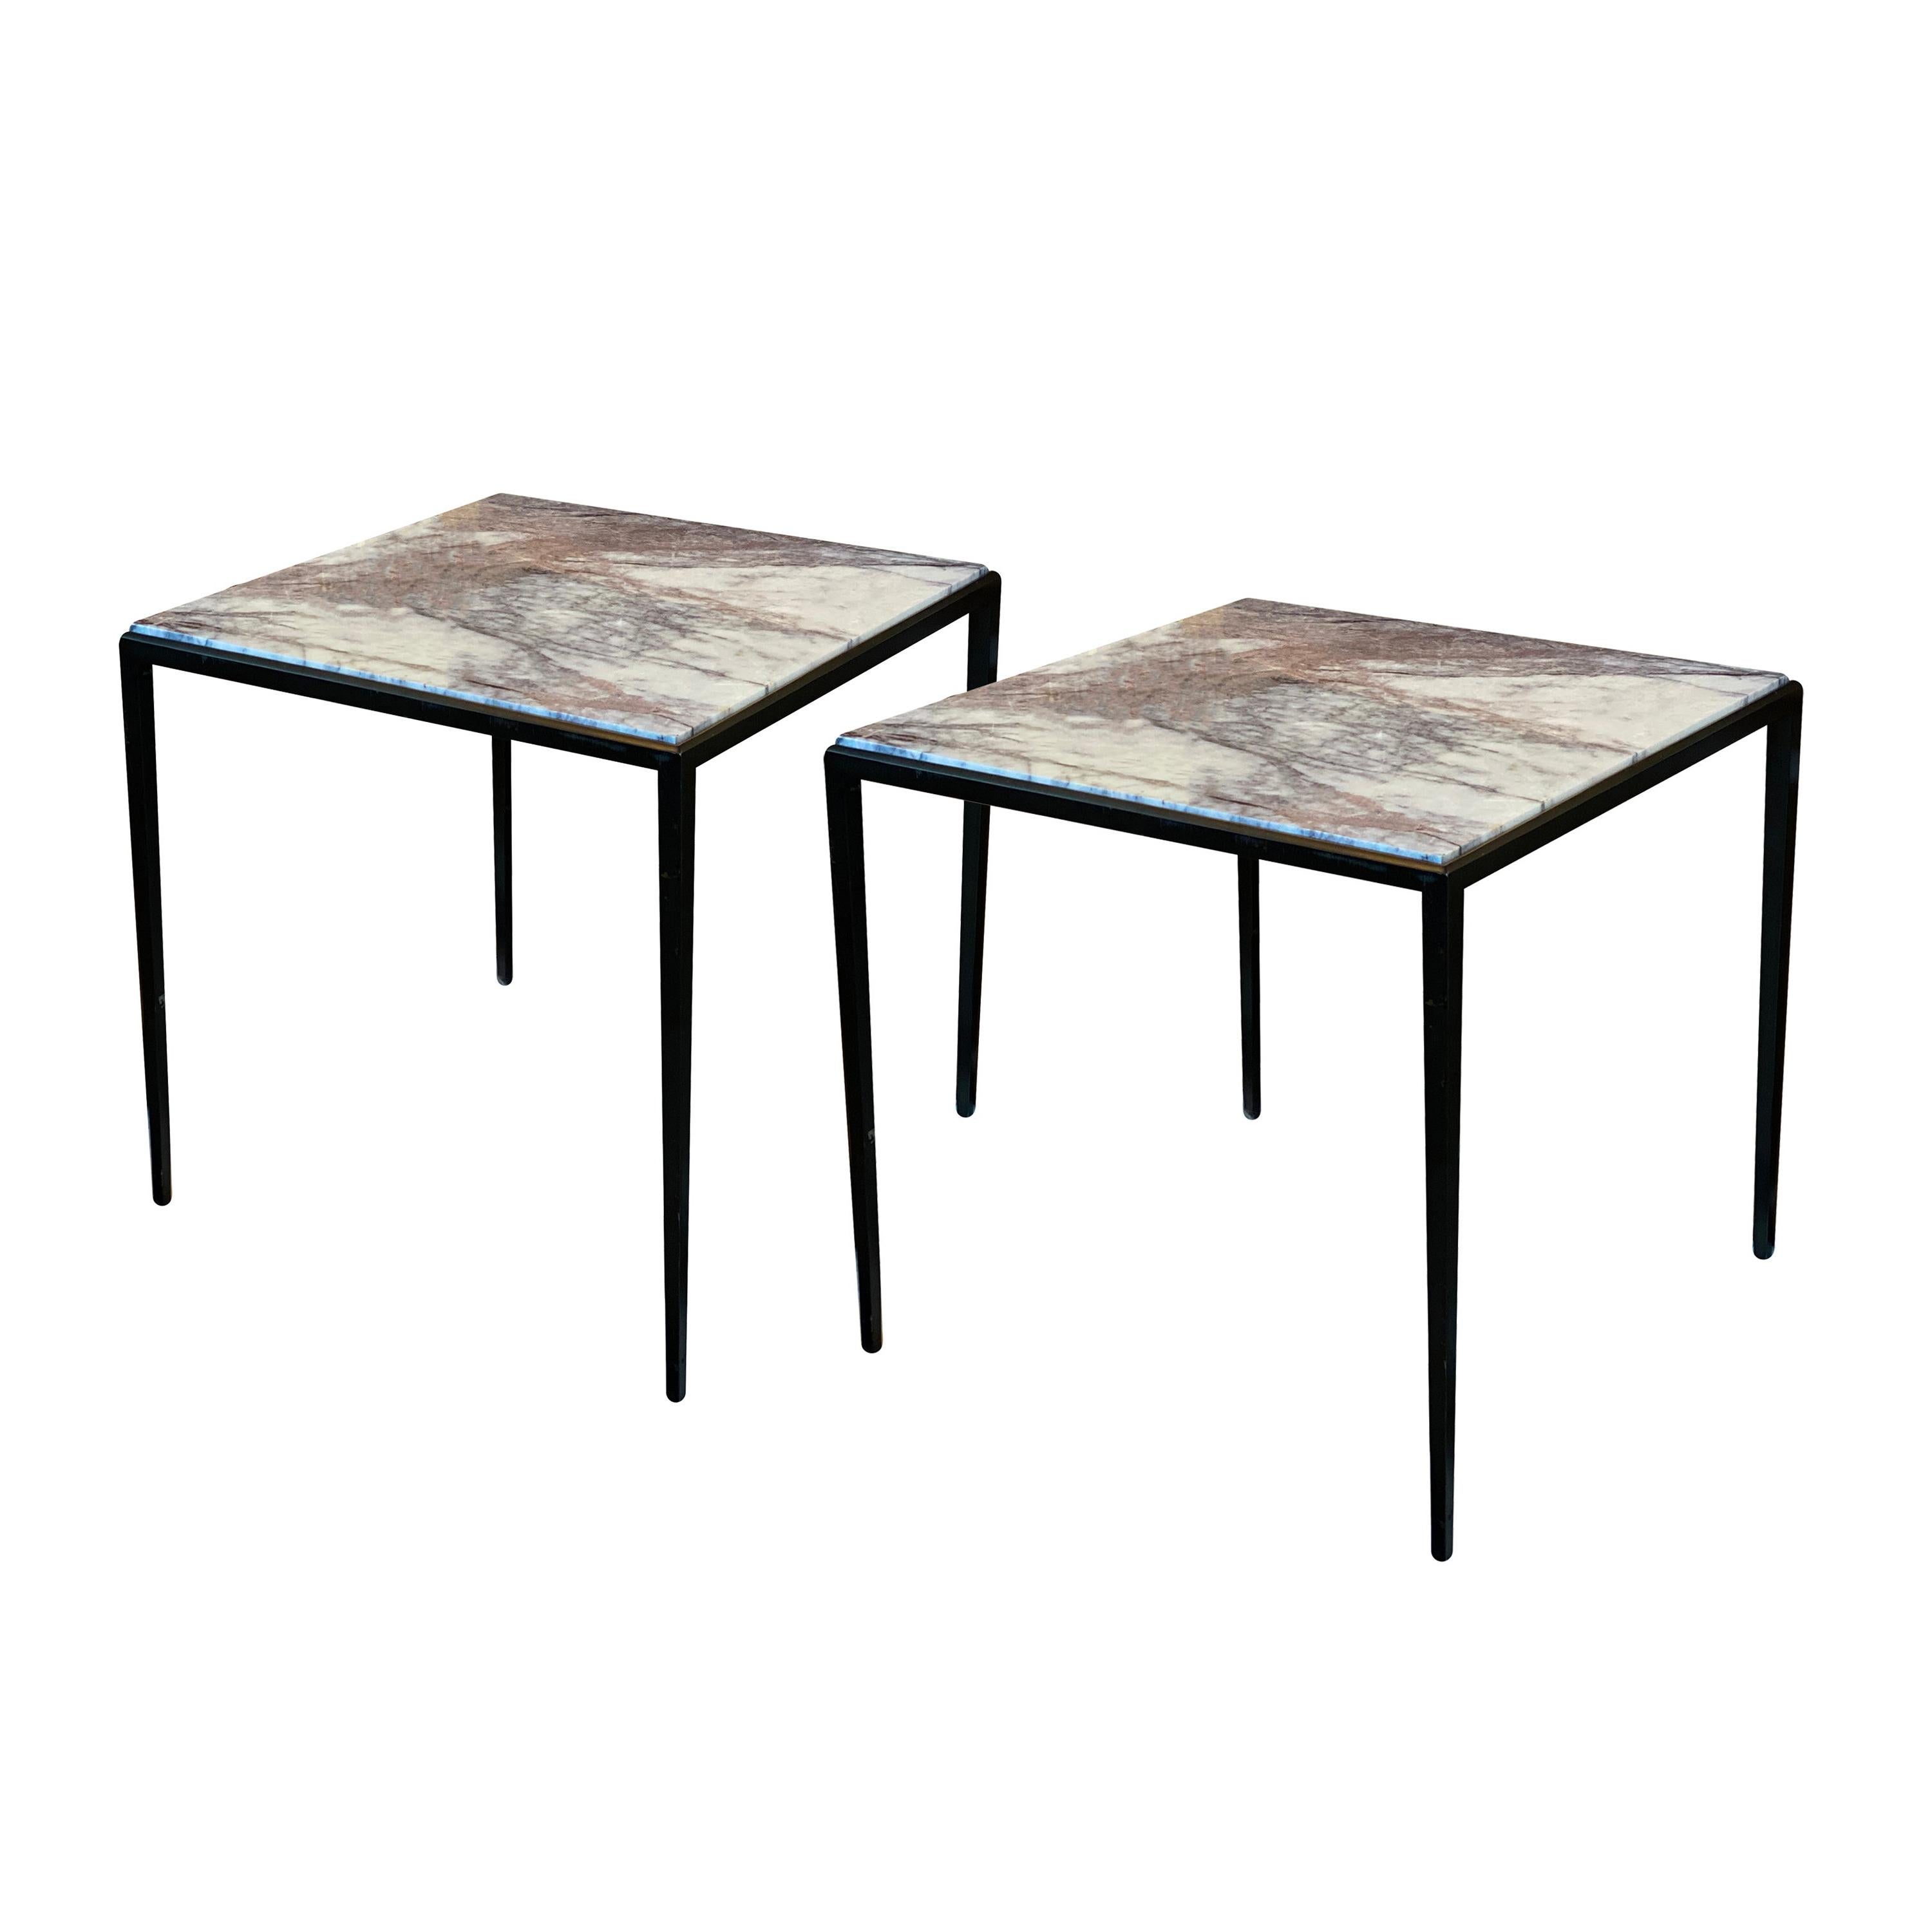 Pair of Side Tables with Lavender / Gray Marble and "Bronze" Bases